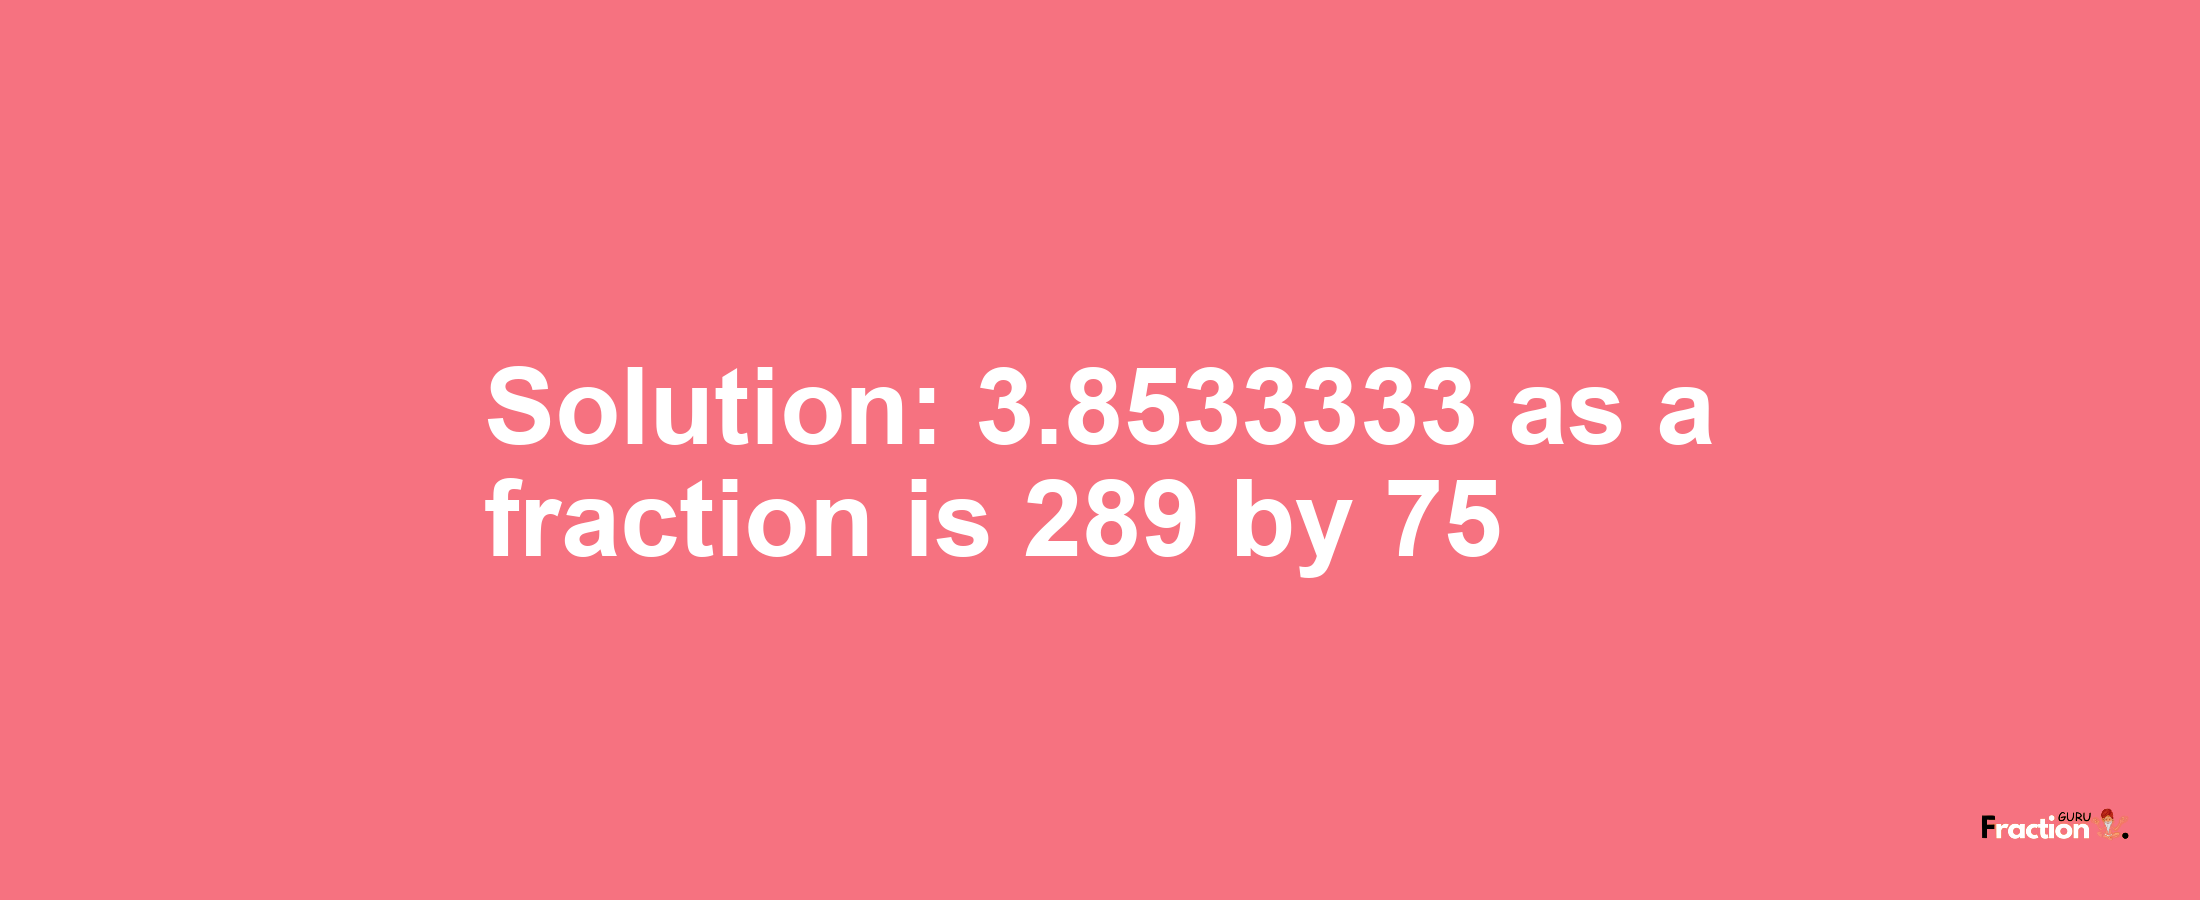 Solution:3.8533333 as a fraction is 289/75